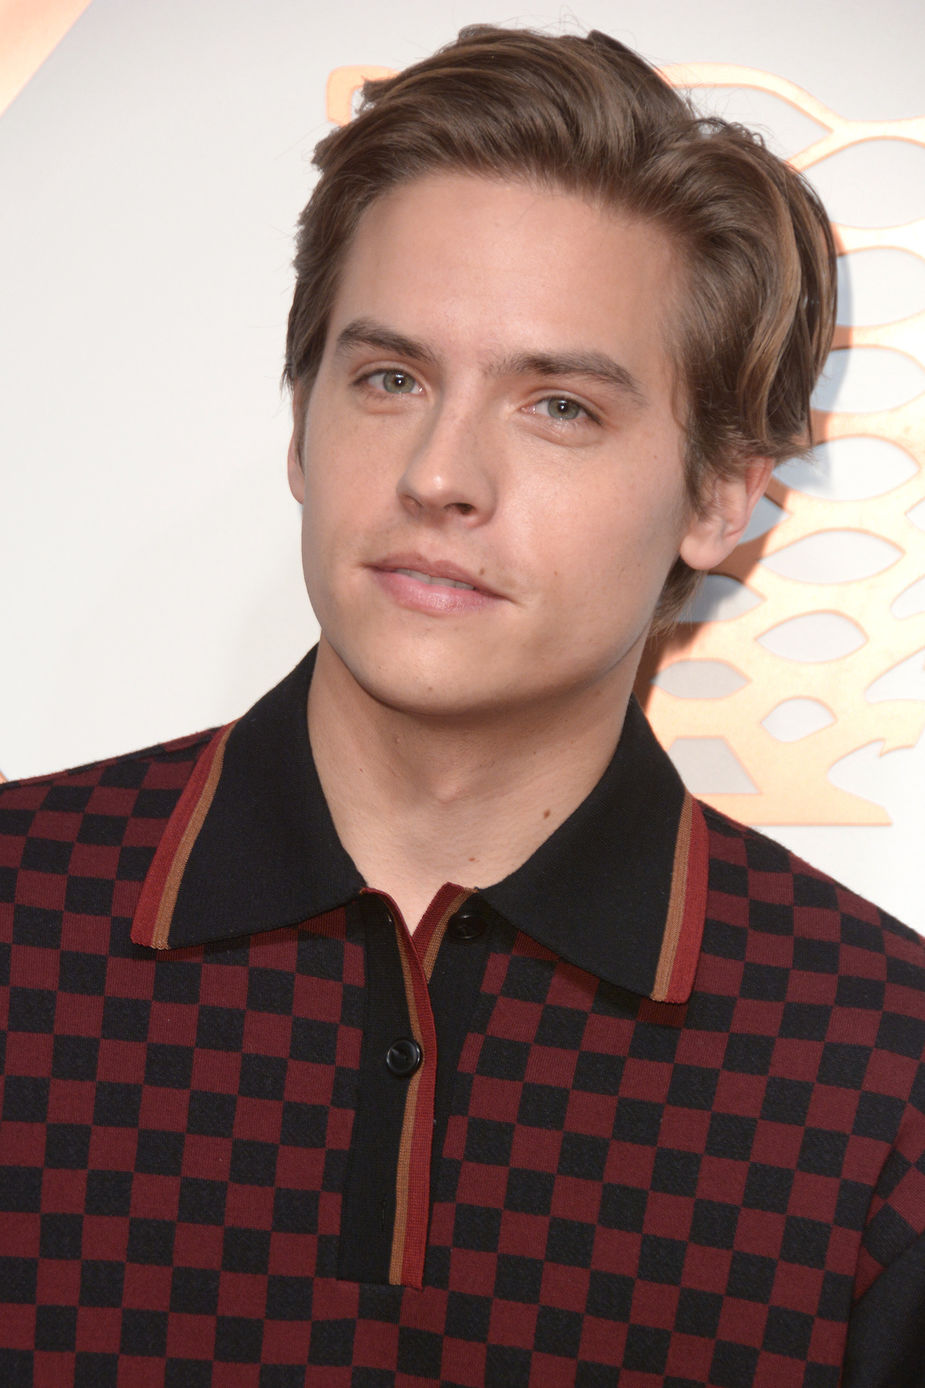 Dylan Sprouse Returns To Acting With 'Dismissed', Casting, Dylan Sprouse